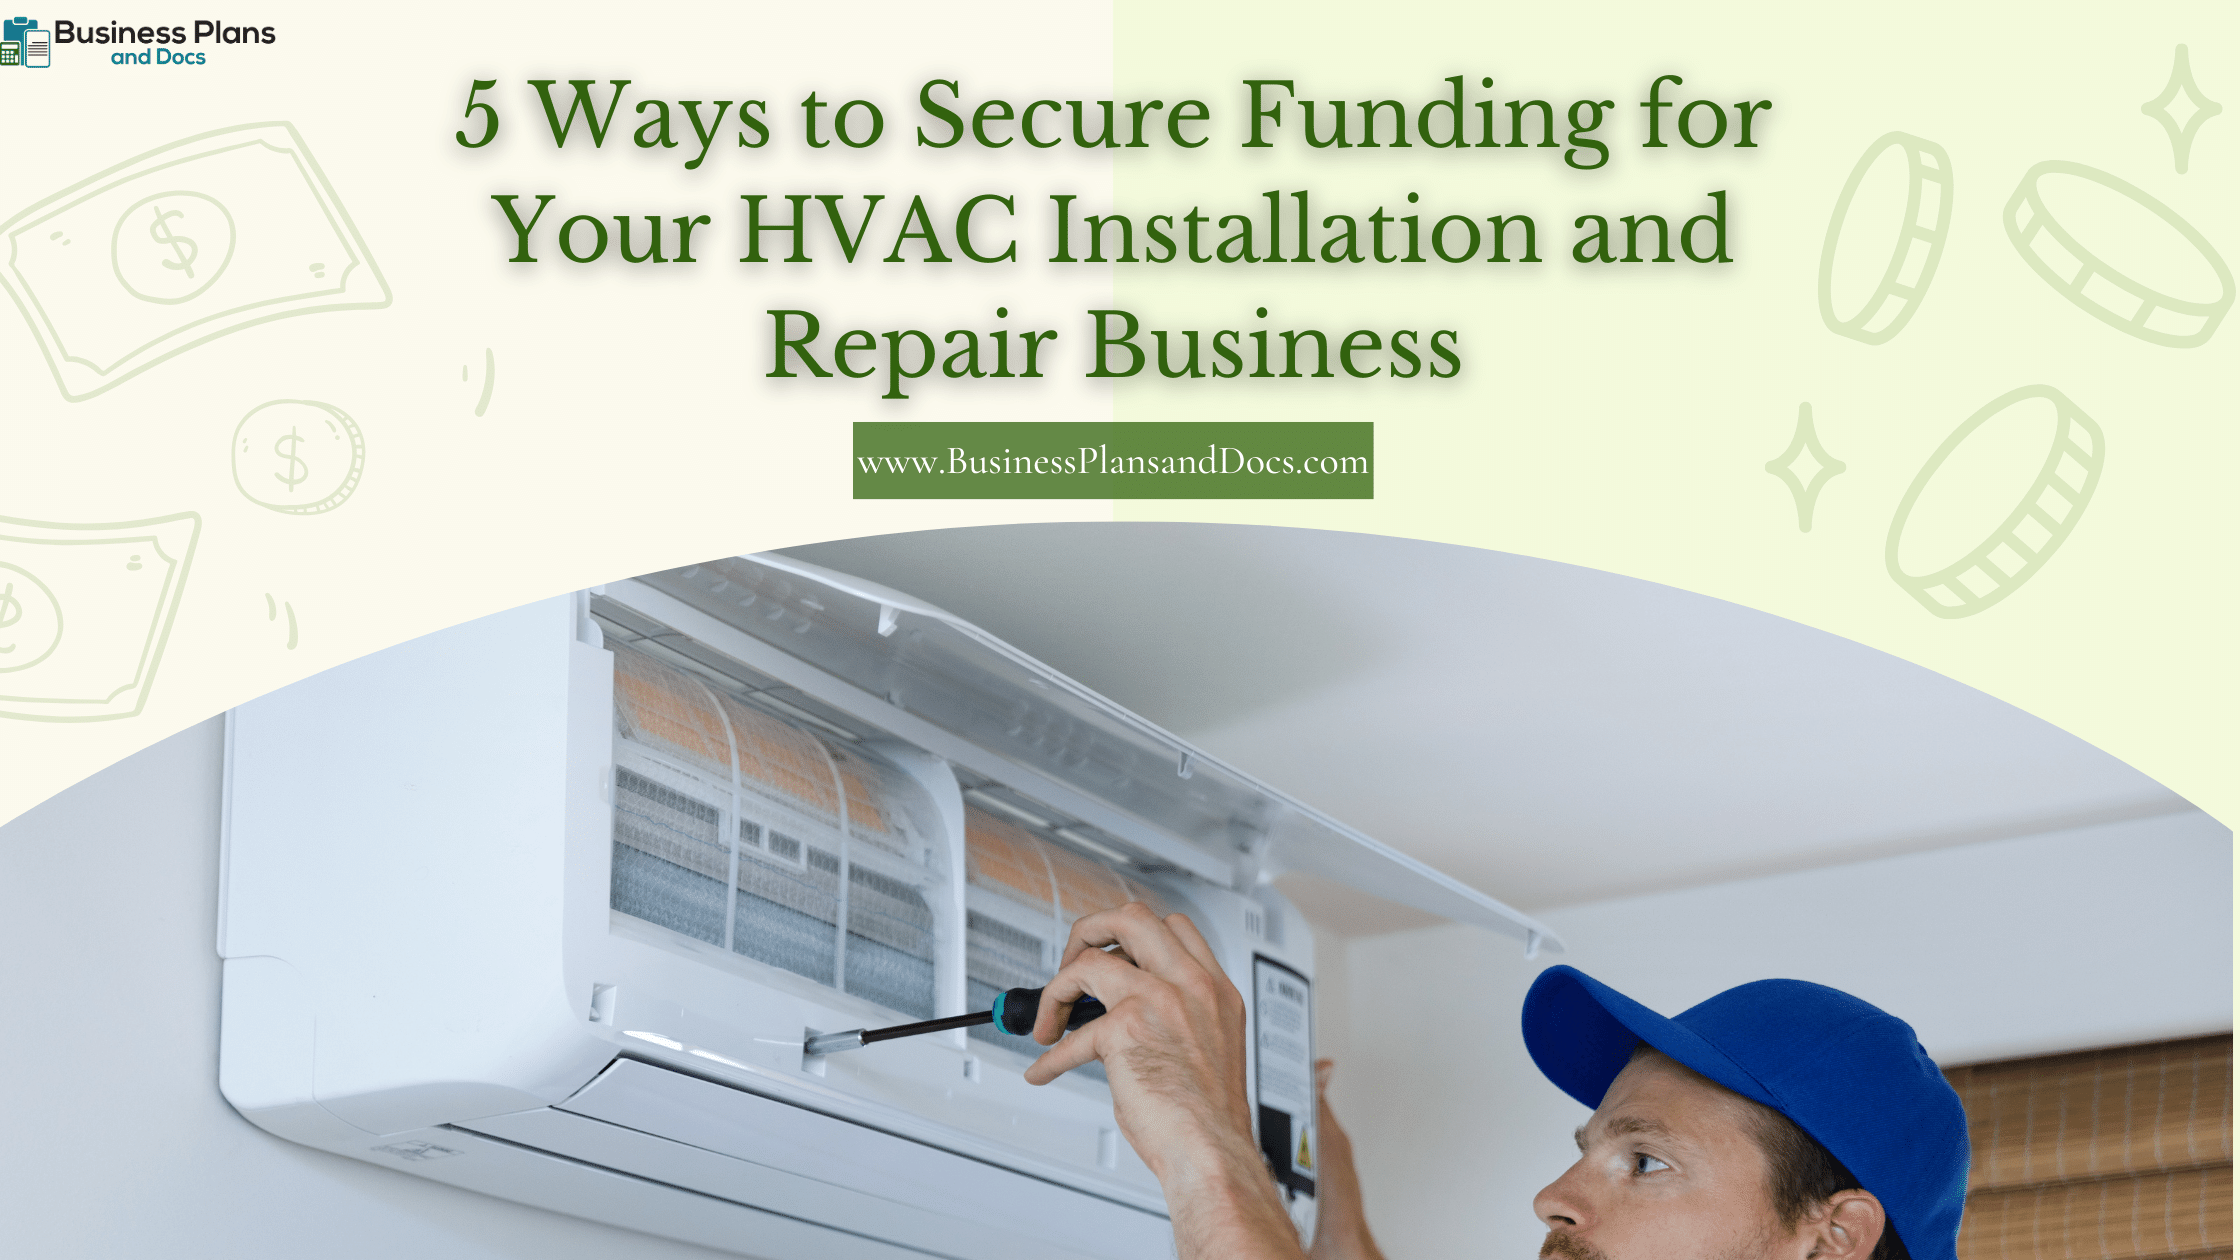 5 Ways to Secure Funding for Your HVAC Installation and Repair Business